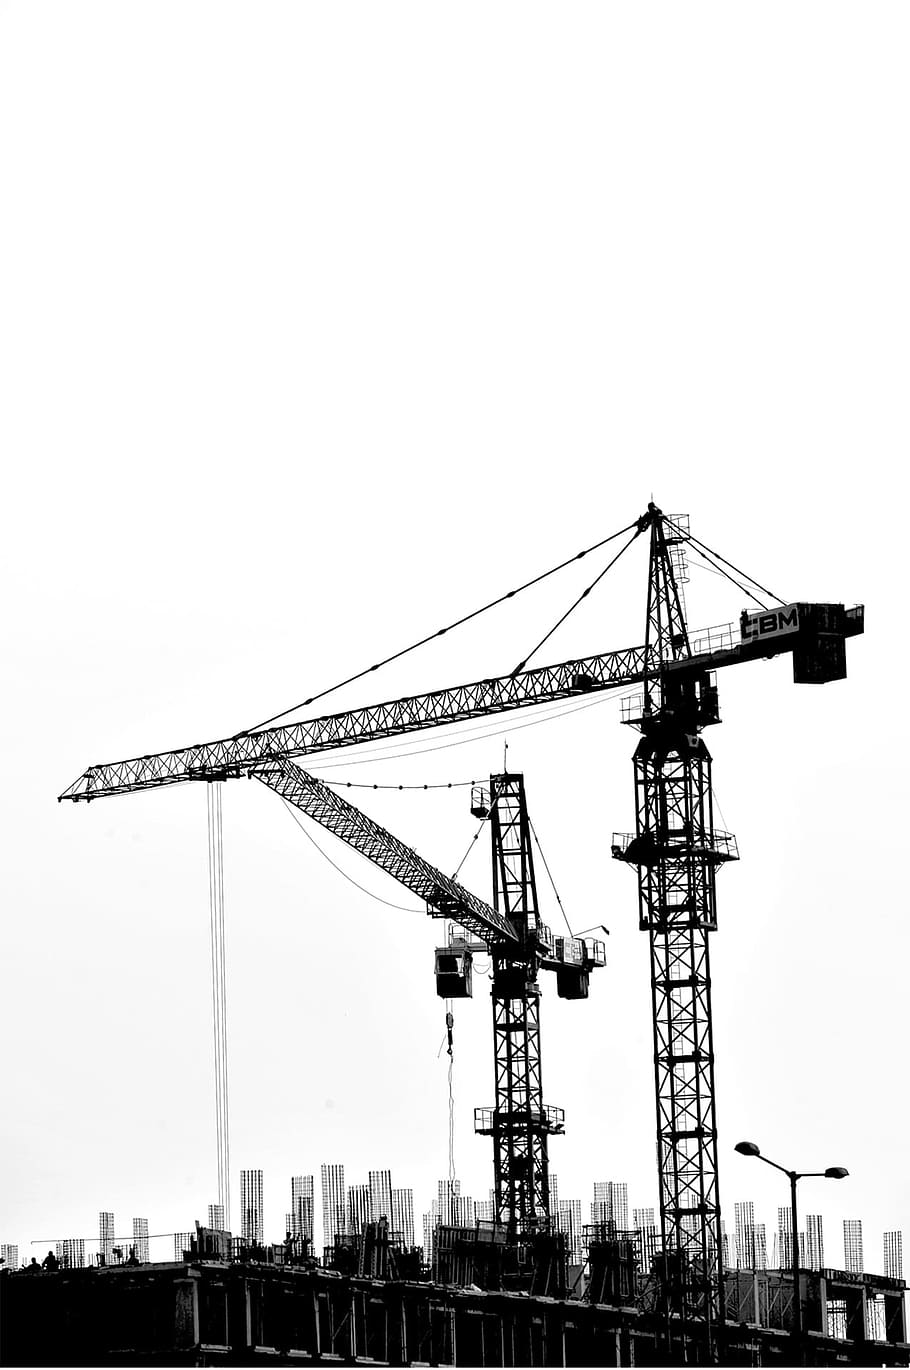 industry, expression, steel, heavy, tower, business, power, crane, construction industry, machinery